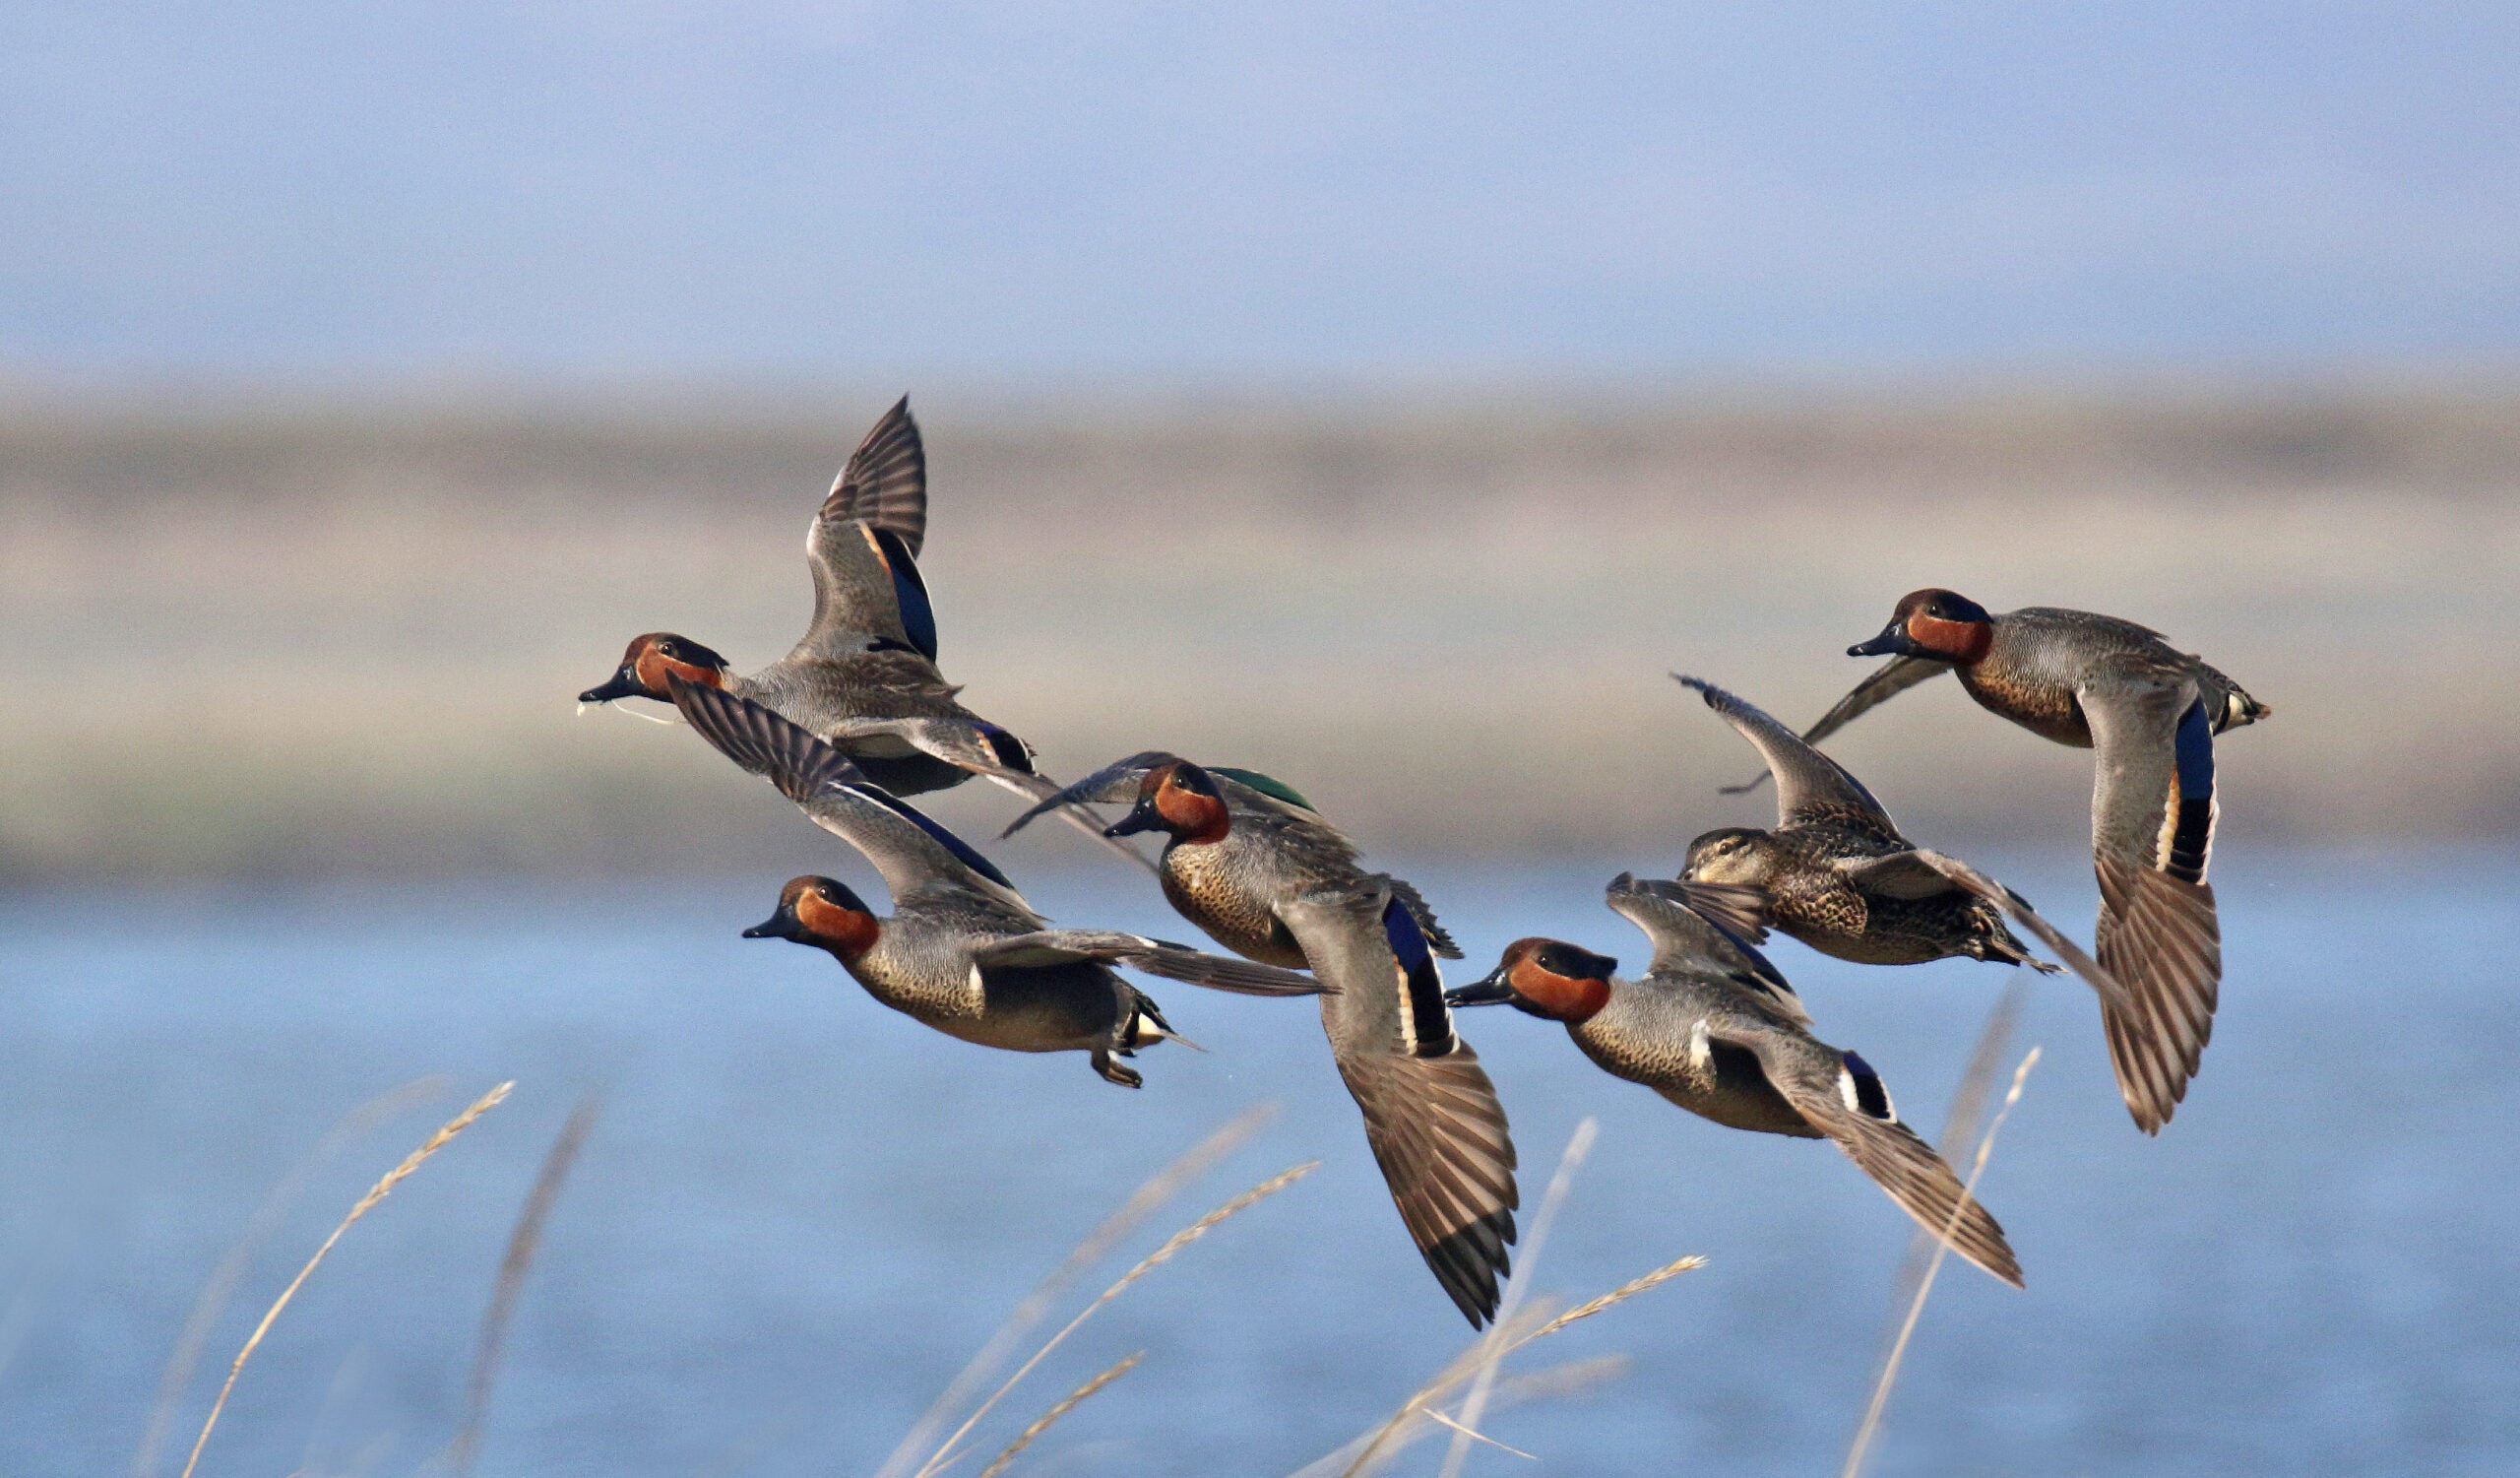 A small group of greenwings flying low over a marsh